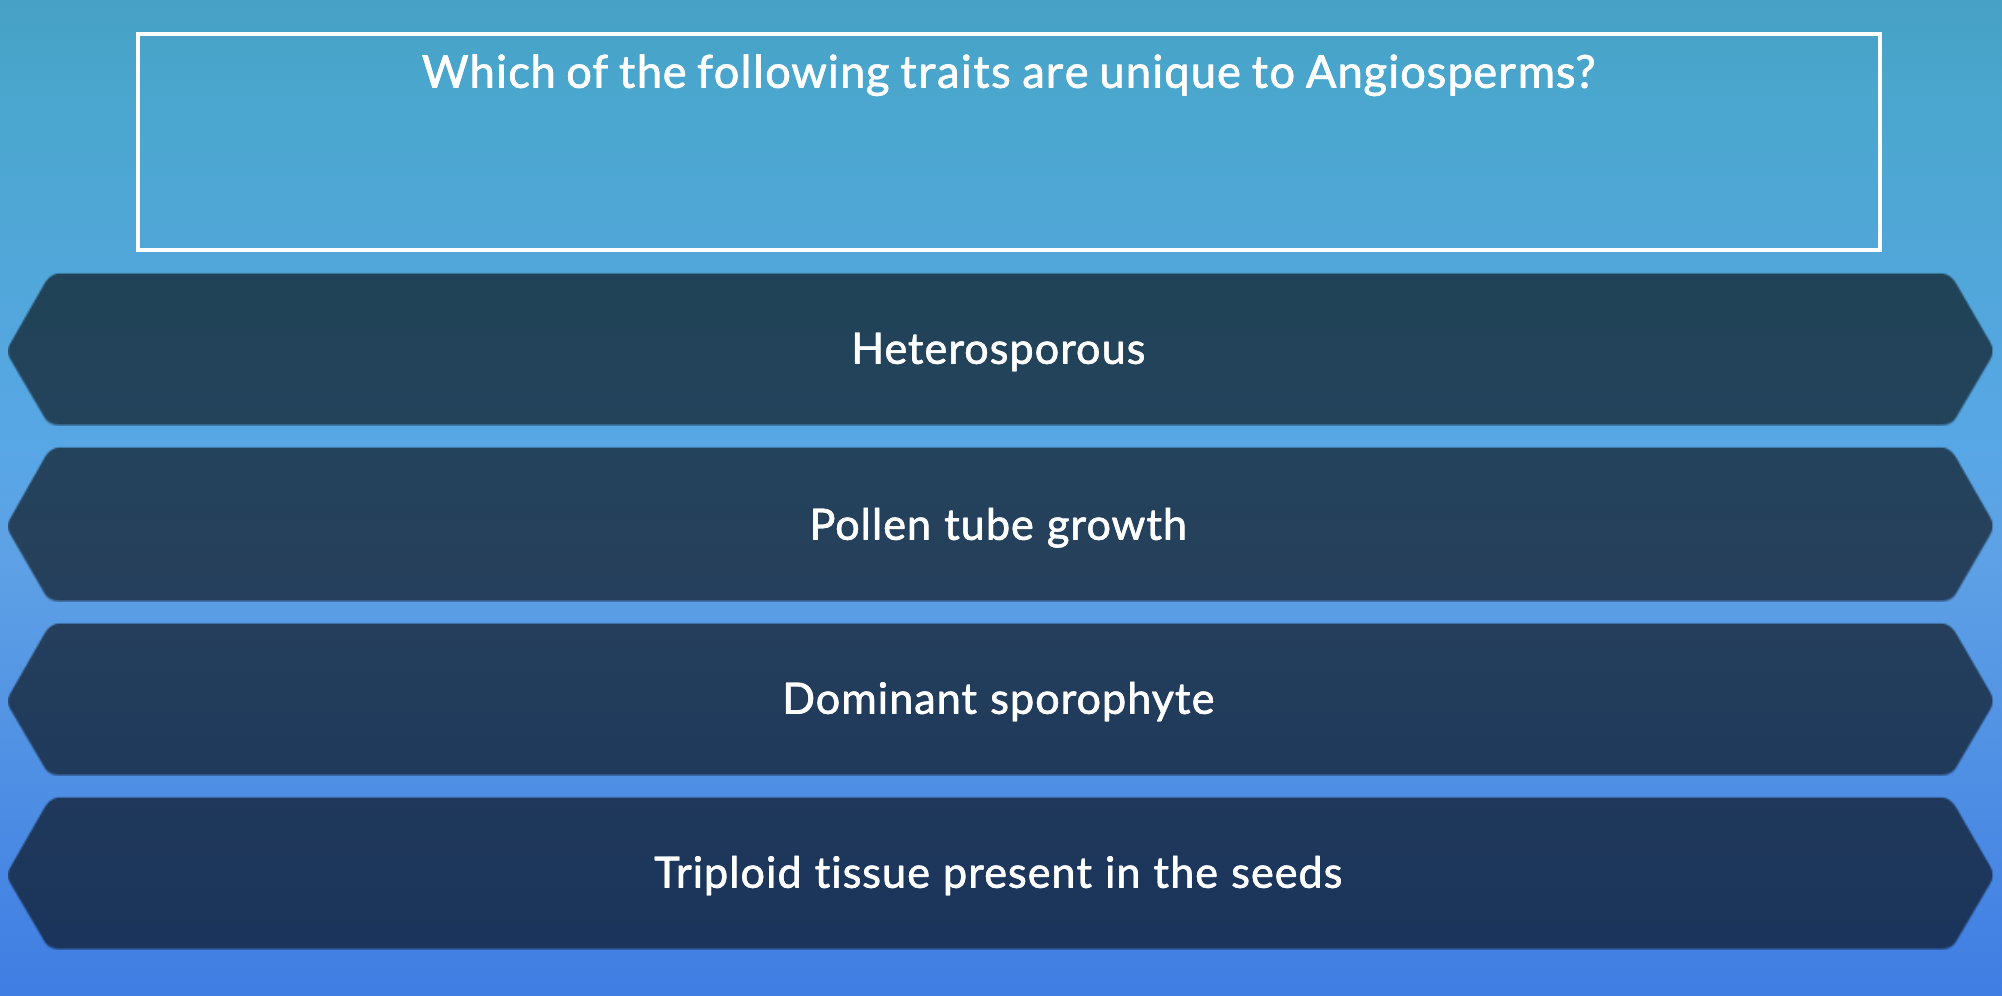 Which of the following traits are unique to Angiosperms?
Heterosporous
Pollen tube growth
Dominant sporophyte
Triploid tissue present in the seeds
